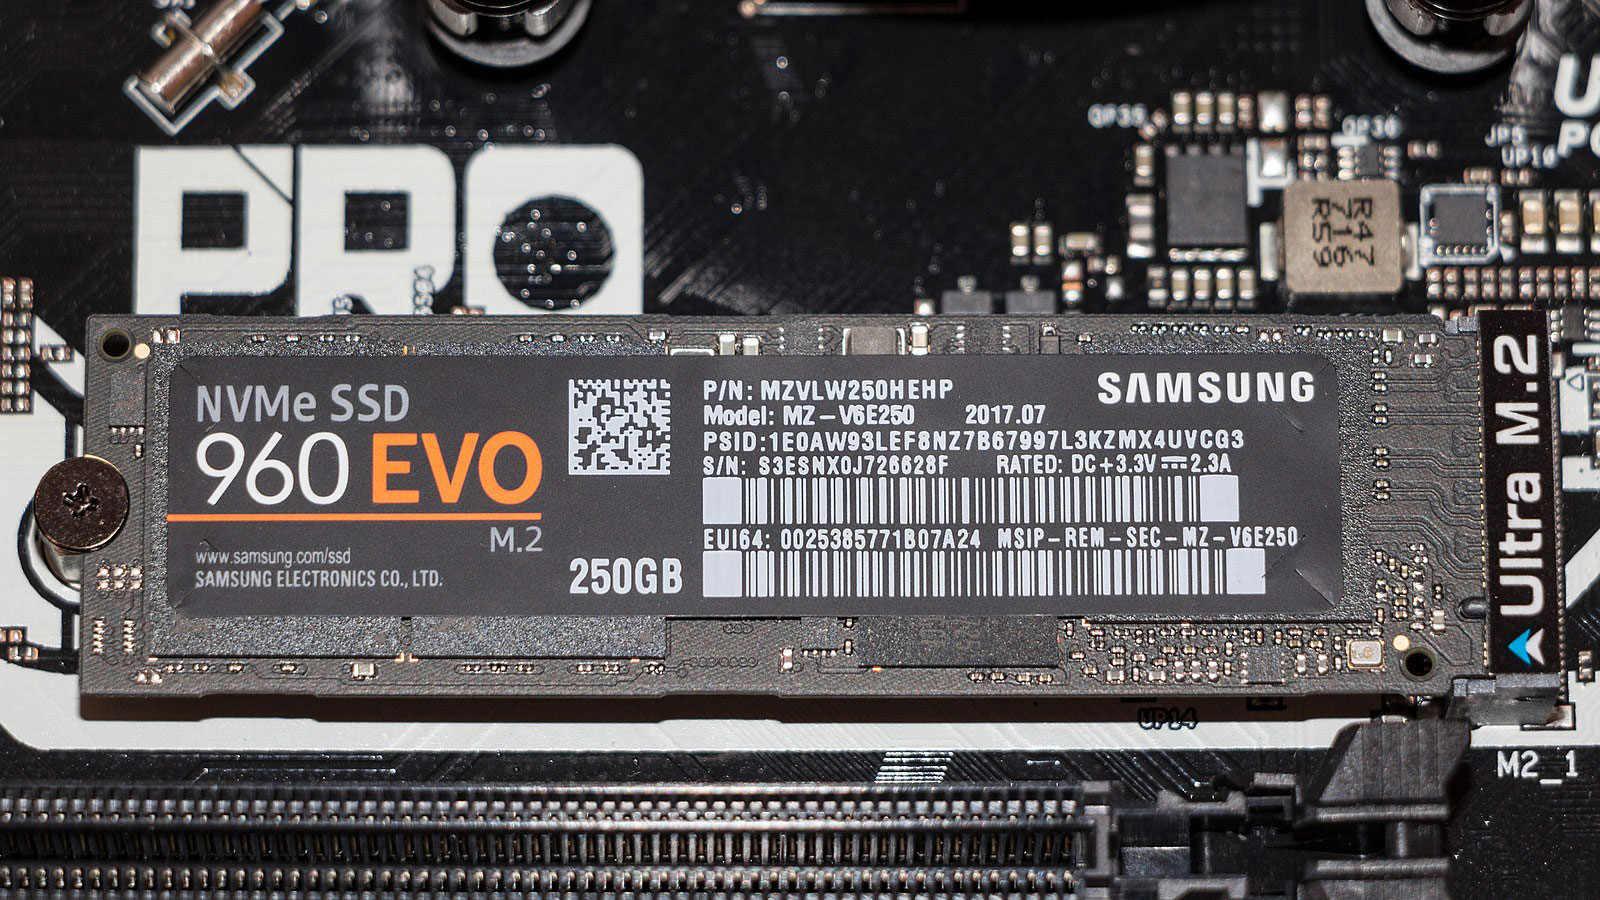 An NVMe M.2 SSD installed in an M.2 slot